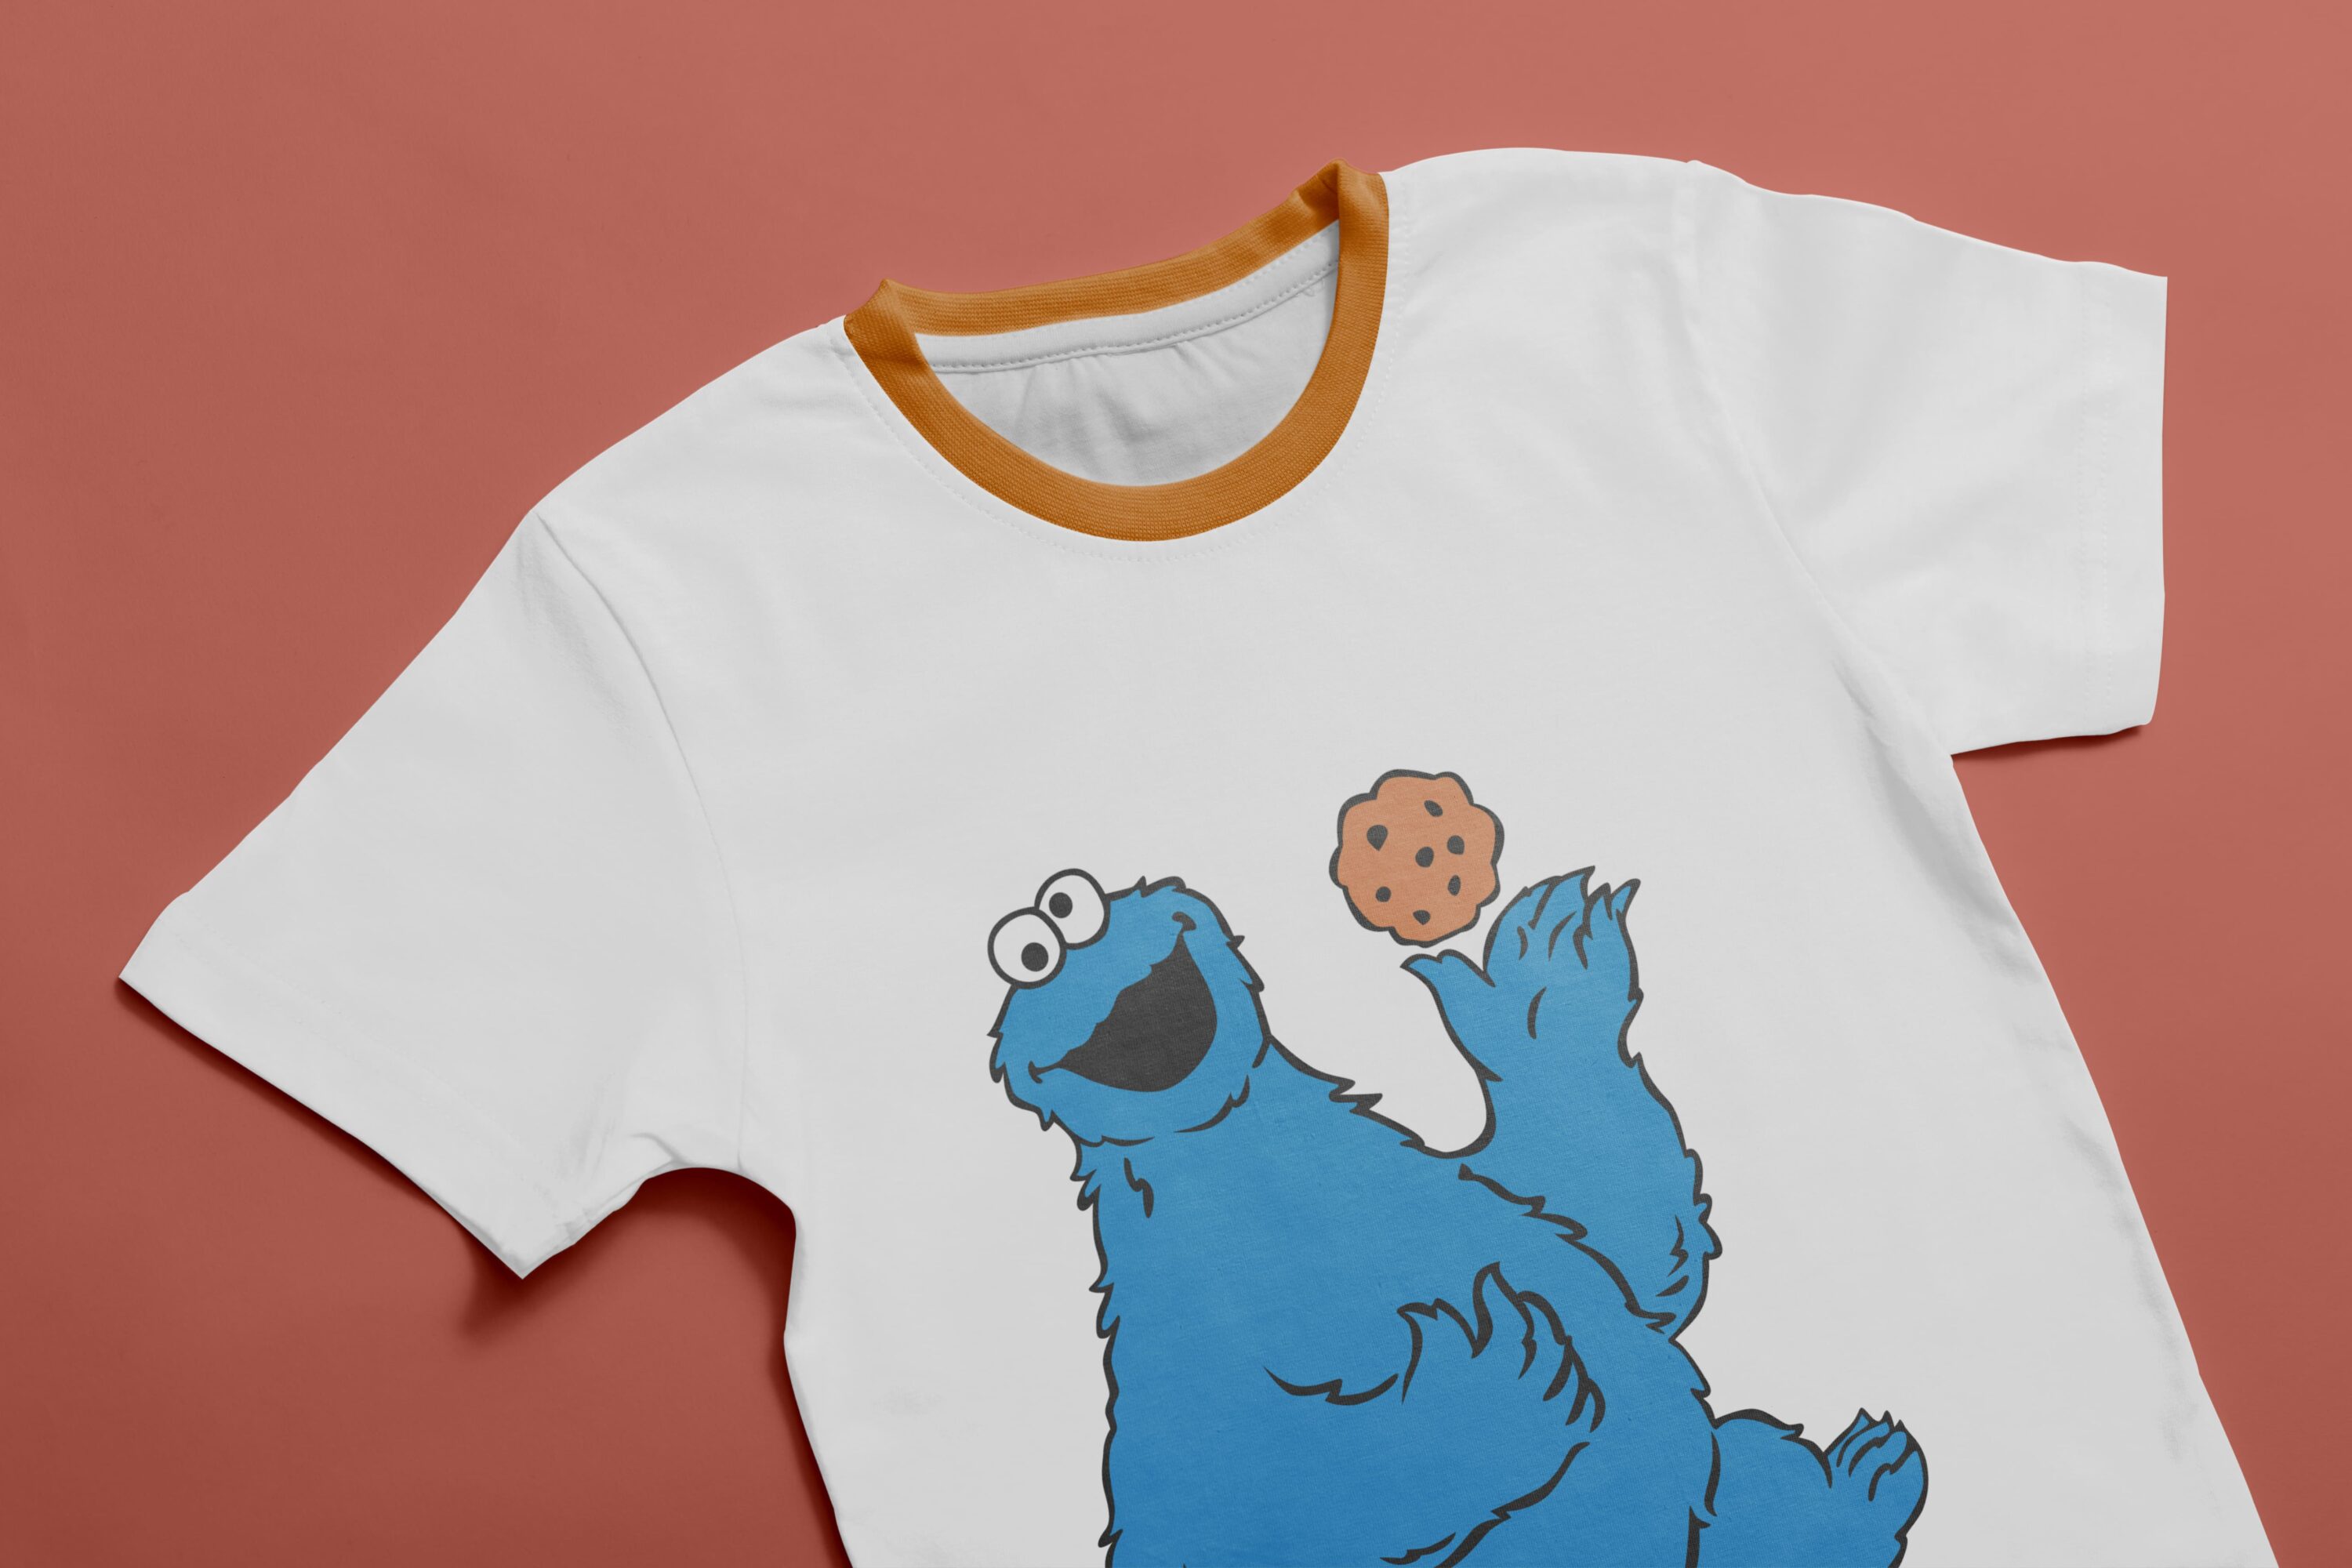 White T-shirt with orange collar and an image of a character - Cookie Monster, holding a cookie.